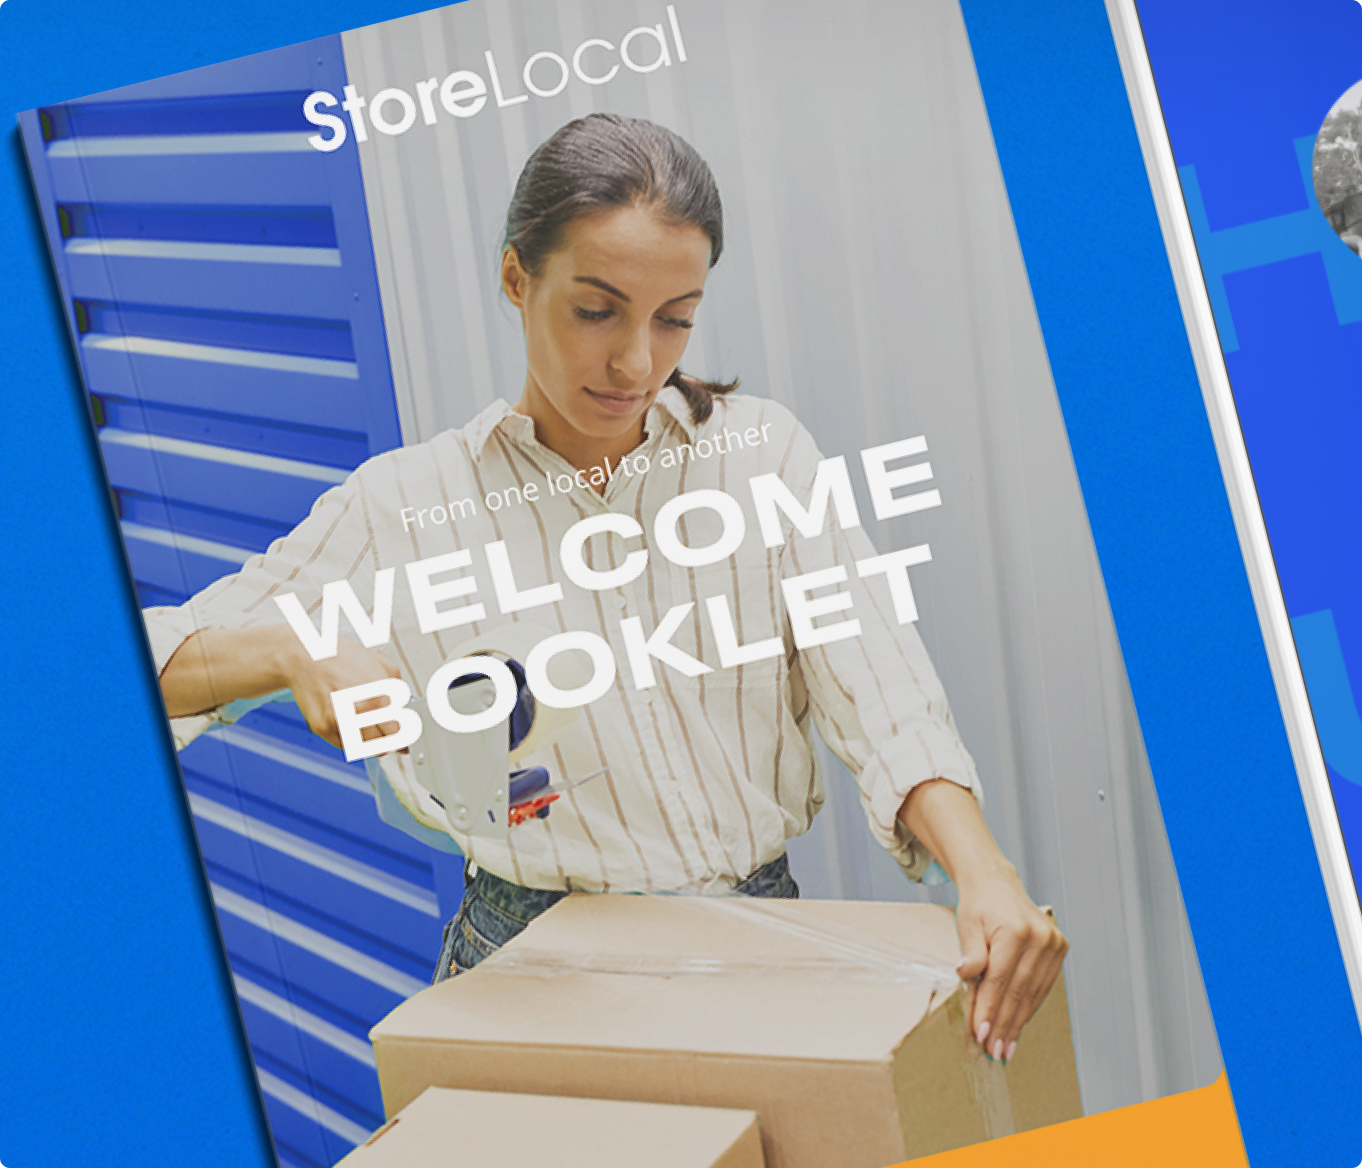 A woman is opening a box with the words storelocal welcome booklet.